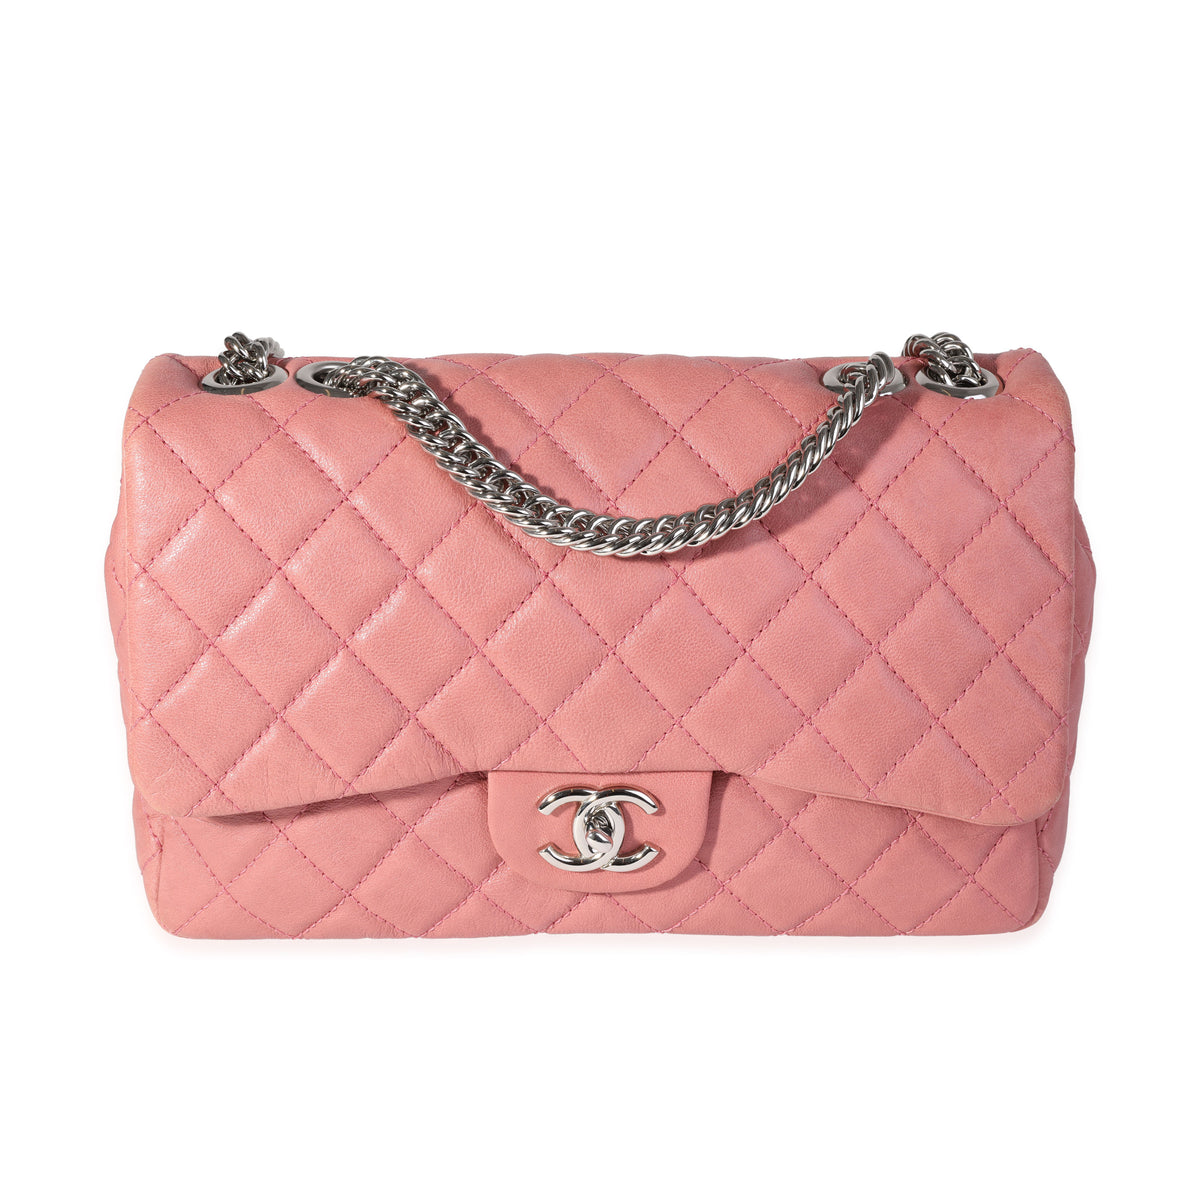 Chanel Small Hobo Bag, Pink Lambskin - New in Box - The Consignment Cafe